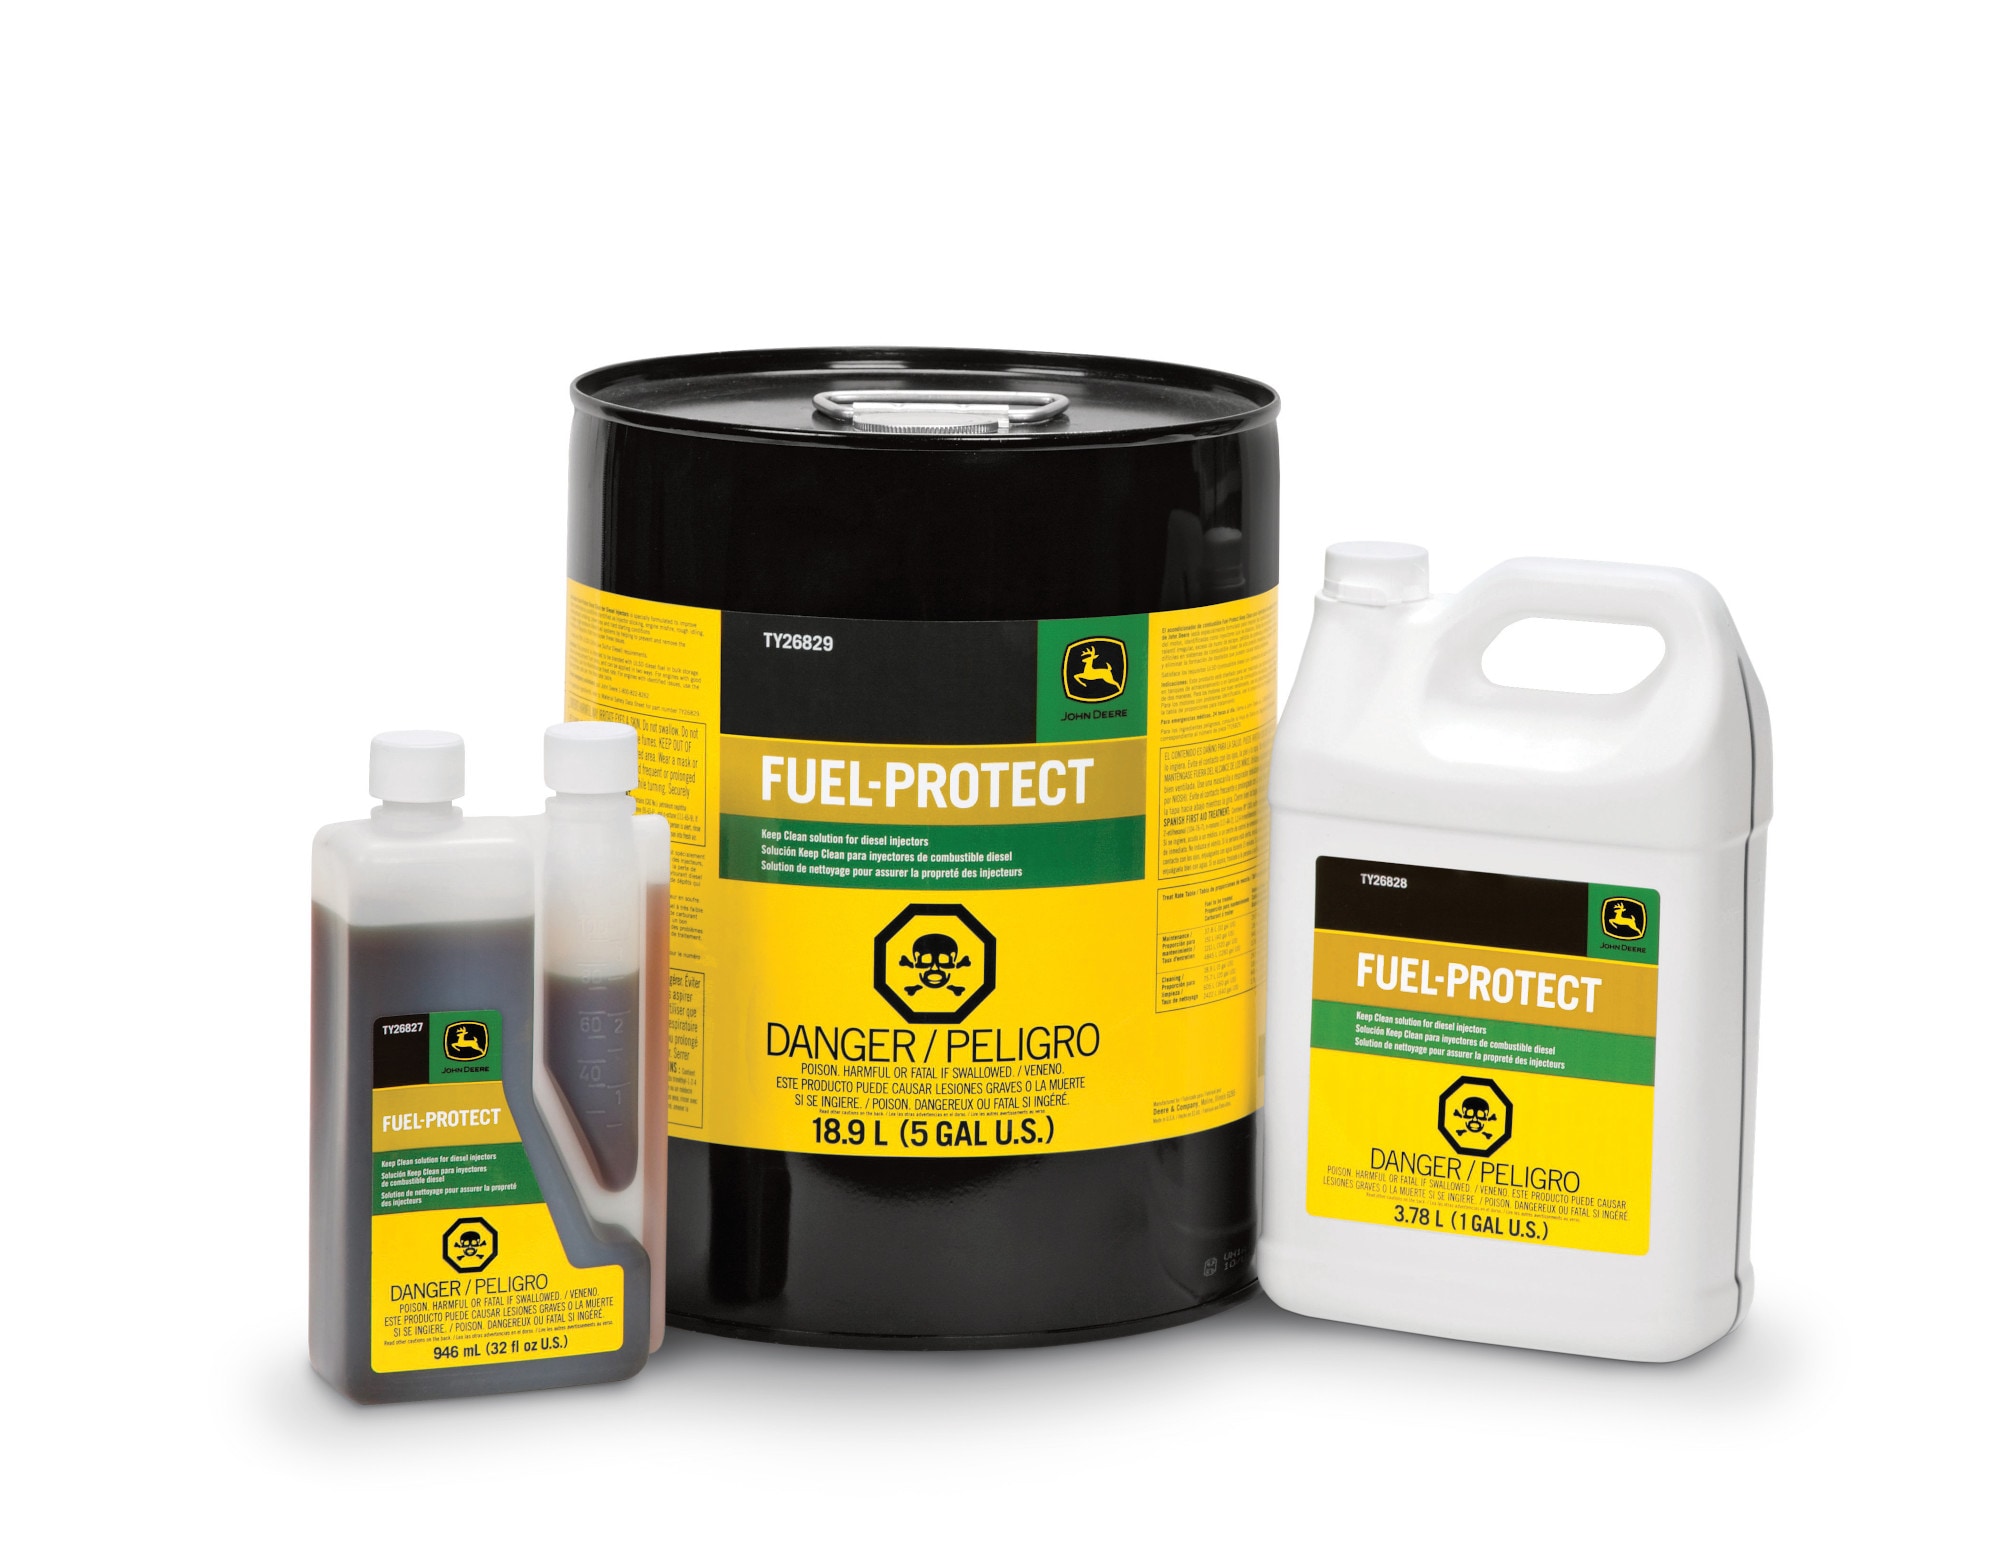 Fuel-Protect Keep Clean Solution